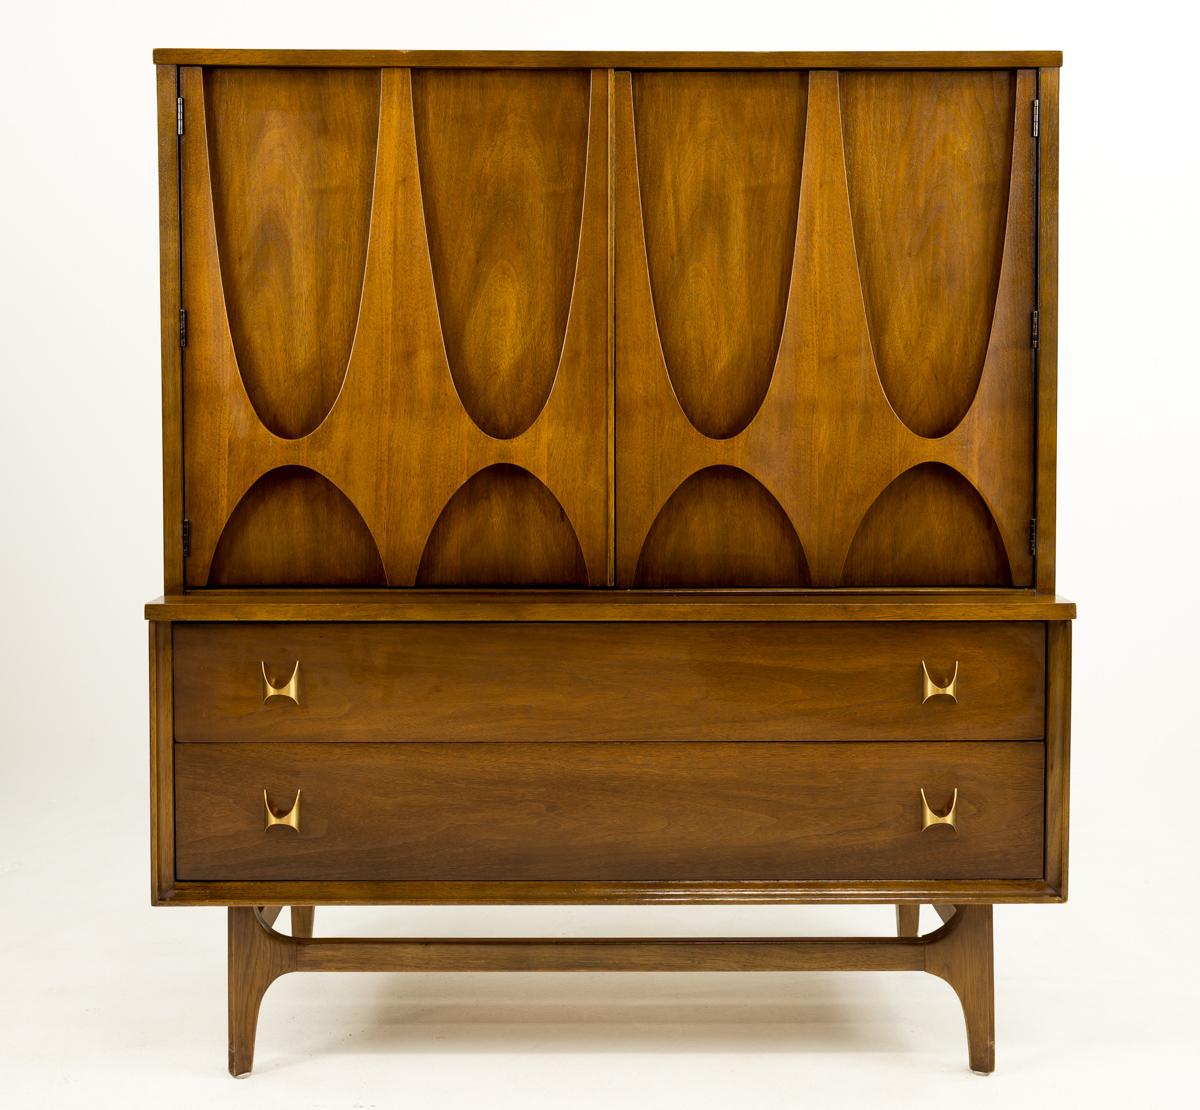 Broyhill Brasilia Mid Century Highboy Dresser Gentlemans Chest

This dresser measures: 44 wide x 19 deep x 49.75 inches high

All pieces of furniture can be had in what we call restored vintage condition. That means the piece is restored upon